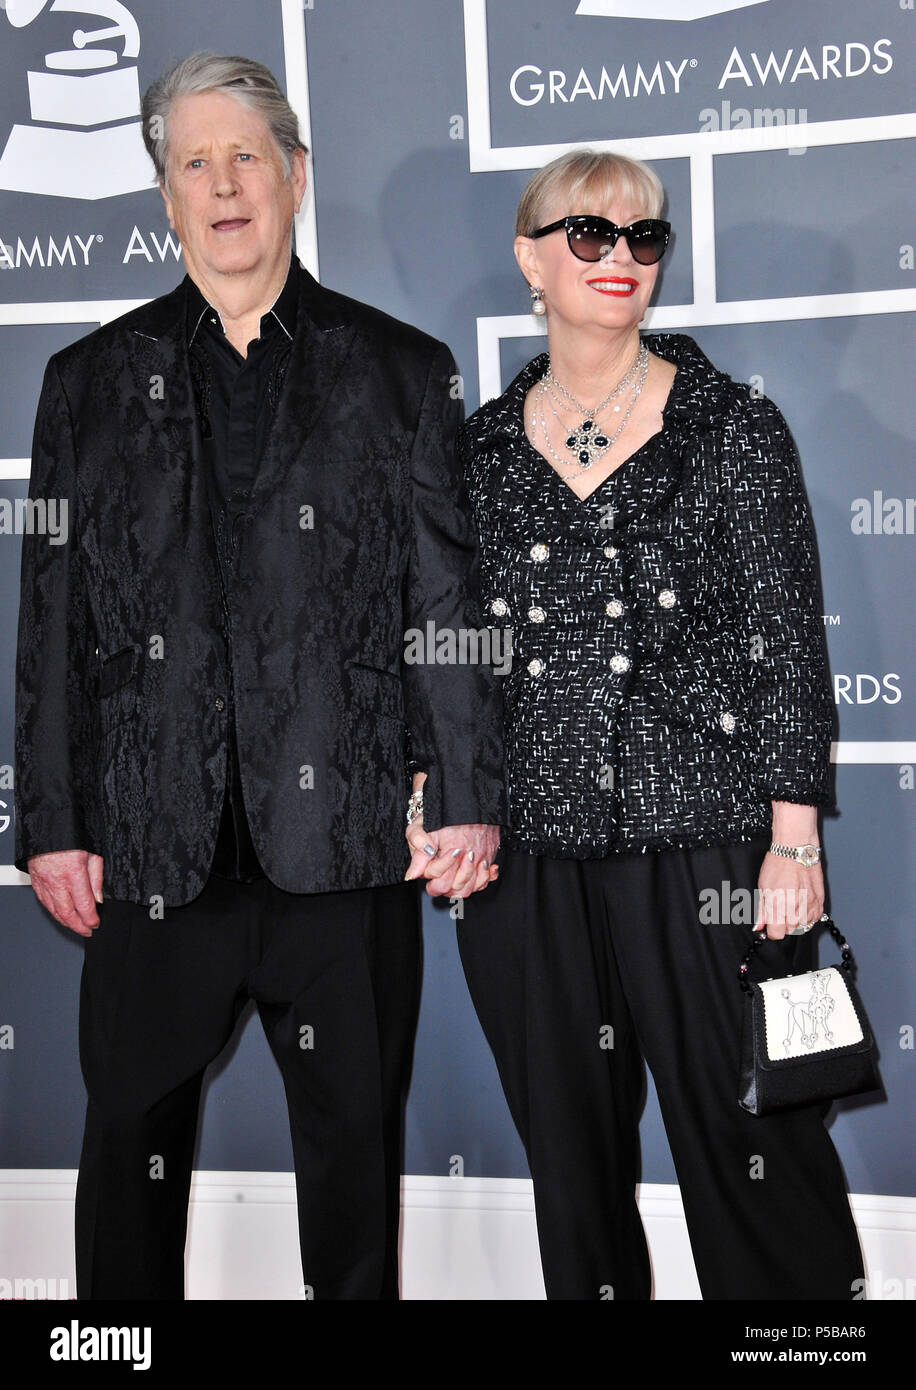 Brian Wilson and wife 502 at  the 55th Ann. Grammy Awards 2013 at the Staples Center in Los Angeles.Brian Wilson and wife 502 ------------- Red Carpet Event, Vertical, USA, Film Industry, Celebrities,  Photography, Bestof, Arts Culture and Entertainment, Topix Celebrities fashion /  Vertical, Best of, Event in Hollywood Life - California,  Red Carpet and backstage, USA, Film Industry, Celebrities,  movie celebrities, TV celebrities, Music celebrities, Photography, Bestof, Arts Culture and Entertainment,  Topix, vertical,  family from from the year , 2013, inquiry tsuni@Gamma-USA.com Husband an Stock Photo